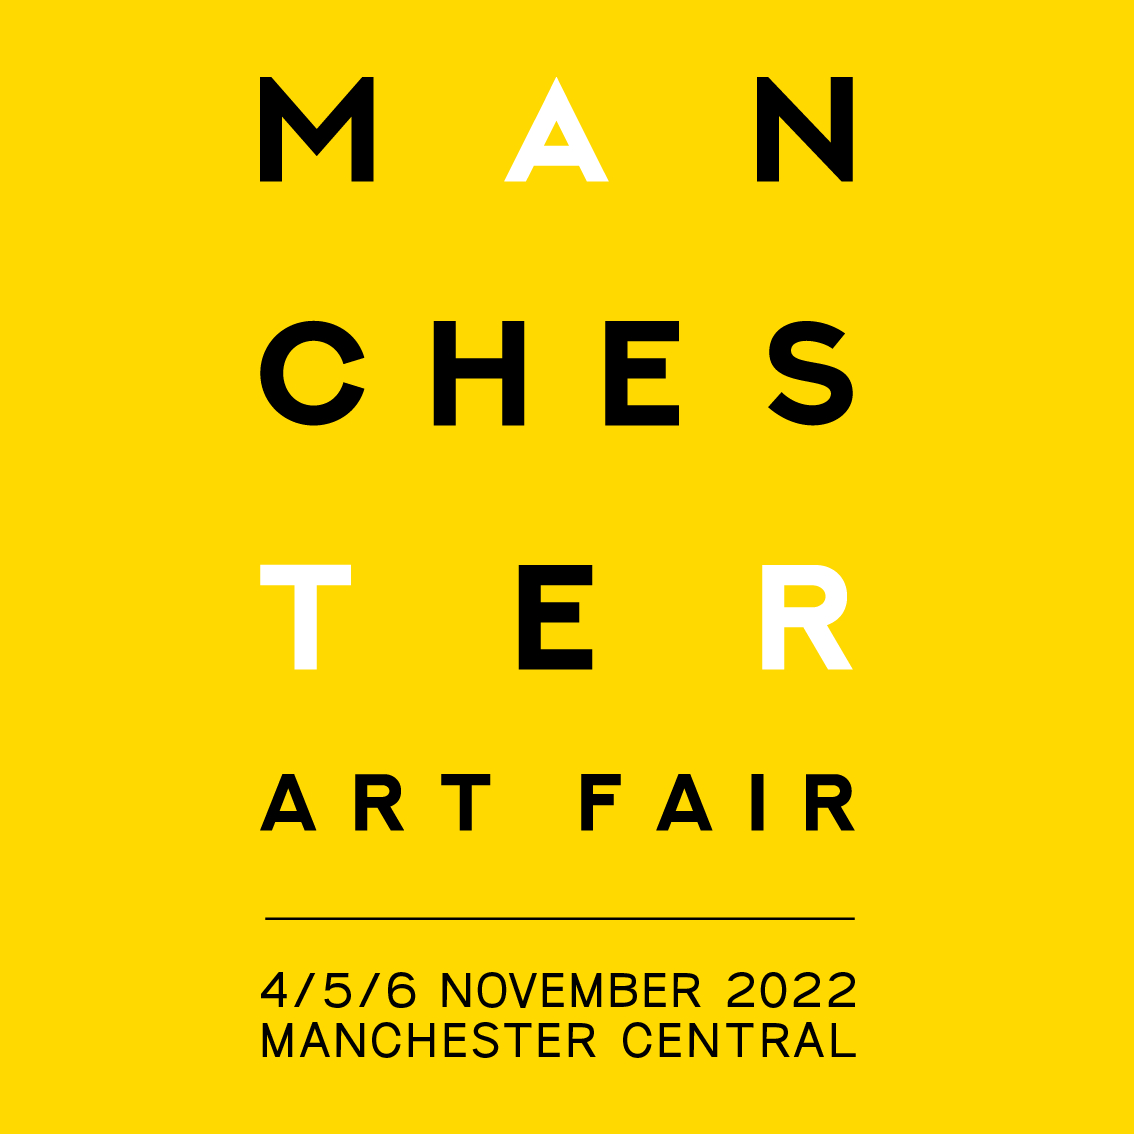 We are delighted to announce that from the 4-6 of November, York Fine Arts will be exhibiting at Manchester Art Fair. Contact the gallery for complimentary VIP preview night tickets. Find us at Stand 210 - see you there! @McrArtFair #manchesterartfair #MAF22